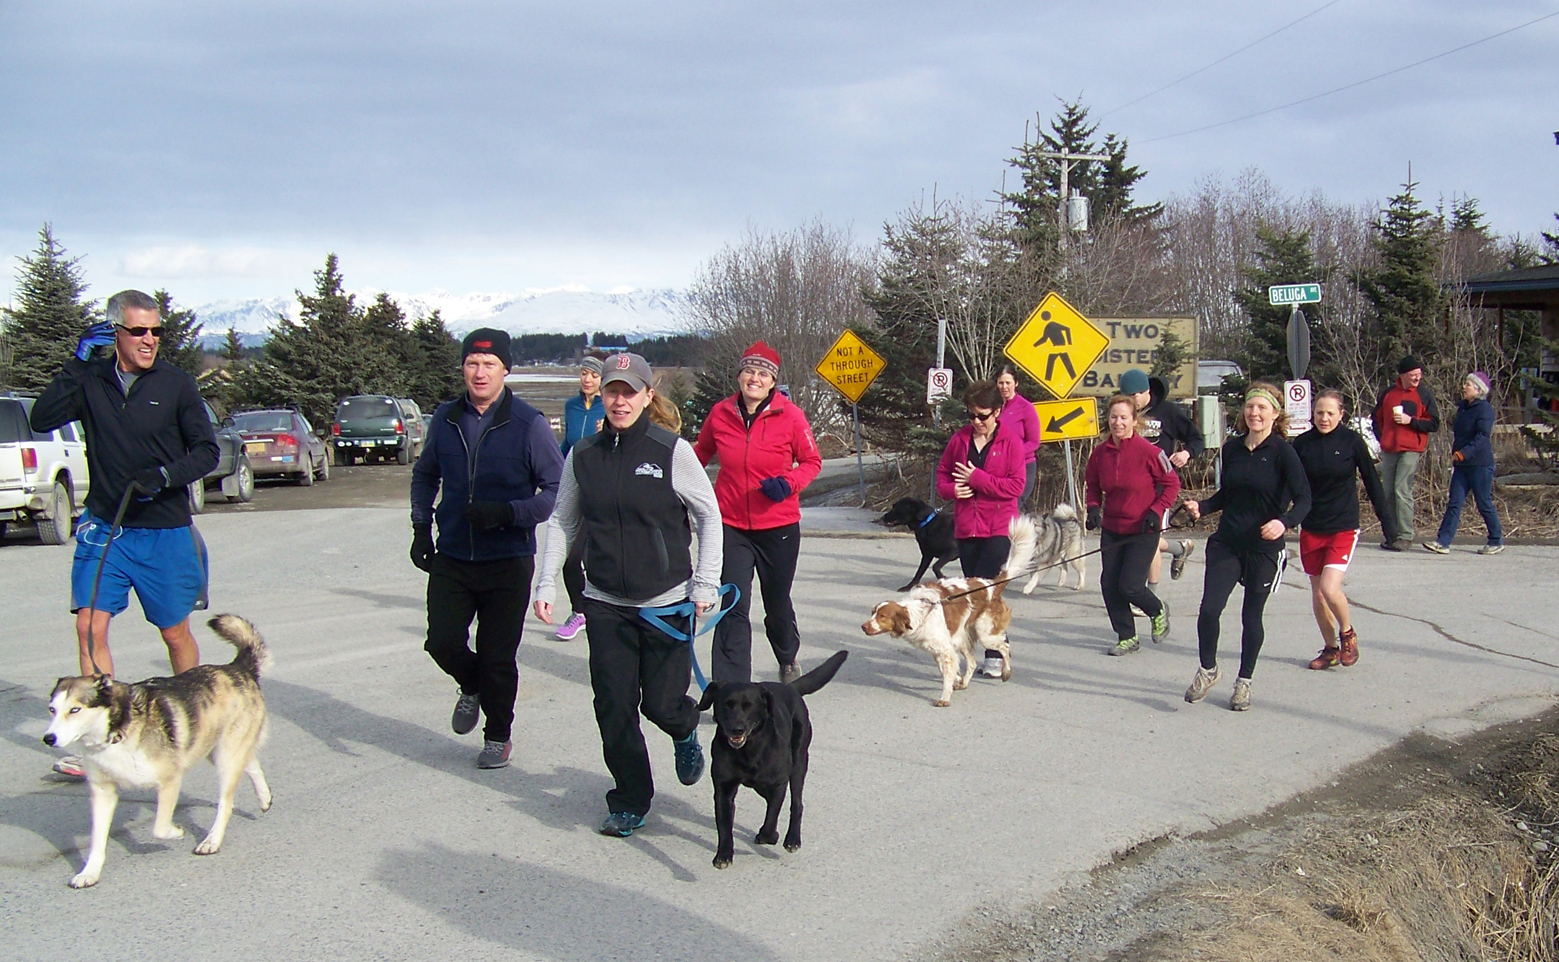 Walkers, runners and a few canine companions set off on a Friday Night Five, a 5K noncompetitive event sponsored by the Kachemak Bay Running Club and organized by club member Rachel Lord, center. -Photo by McKibben Jackinsky, Homer News